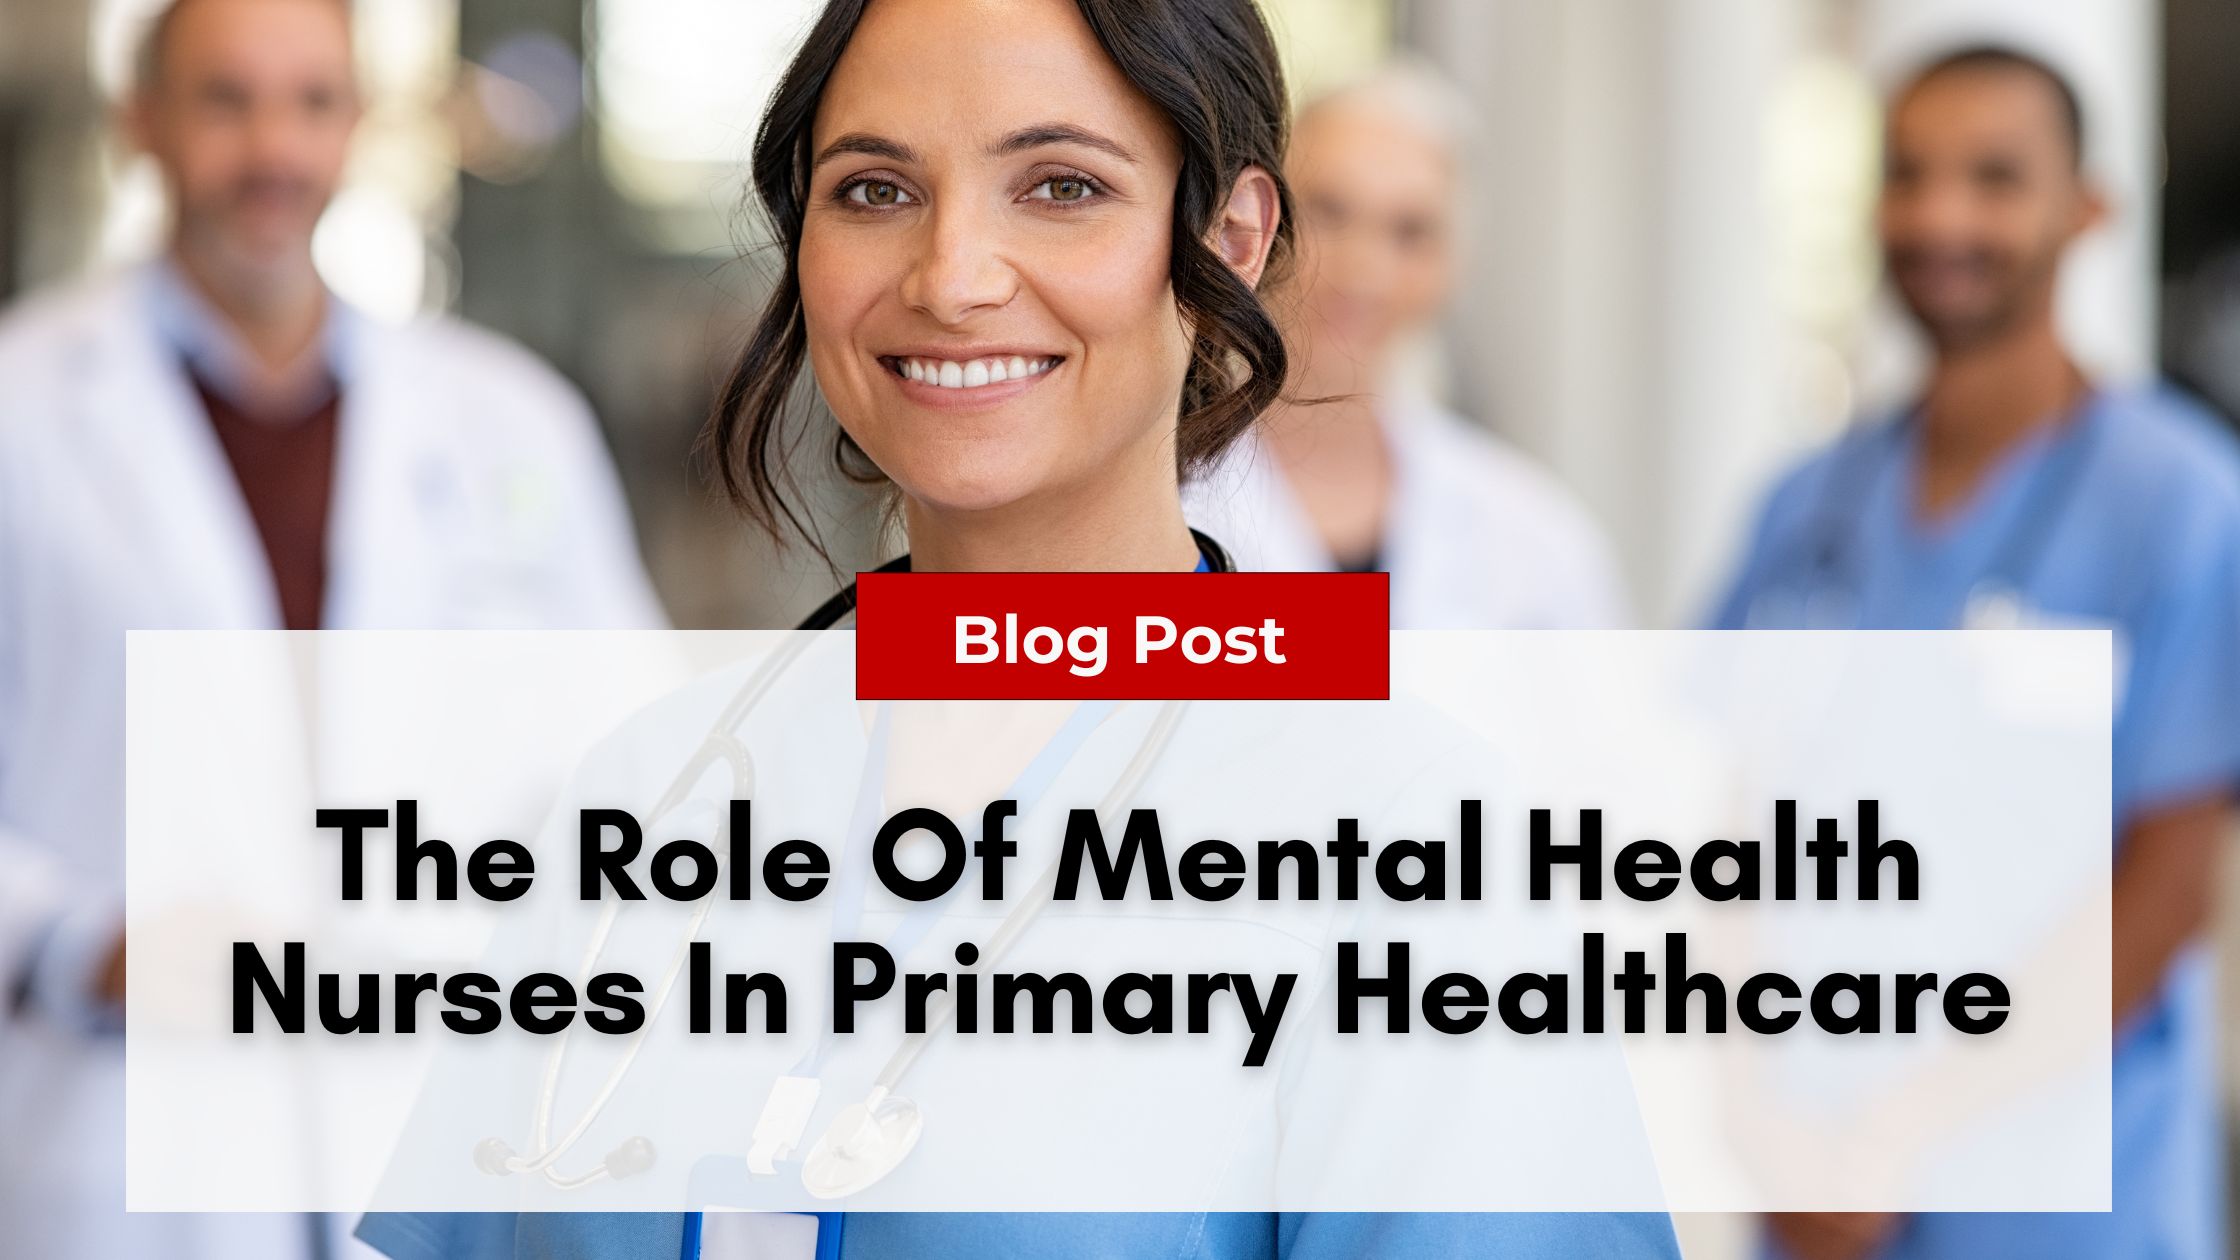 A female nurse smiles at the camera, with three medical professionals in the background. The text overlay reads "Blog Post: The Role of Mental Health Nurses in Primary Healthcare and Addressing Nurse Practitioner Burnout.